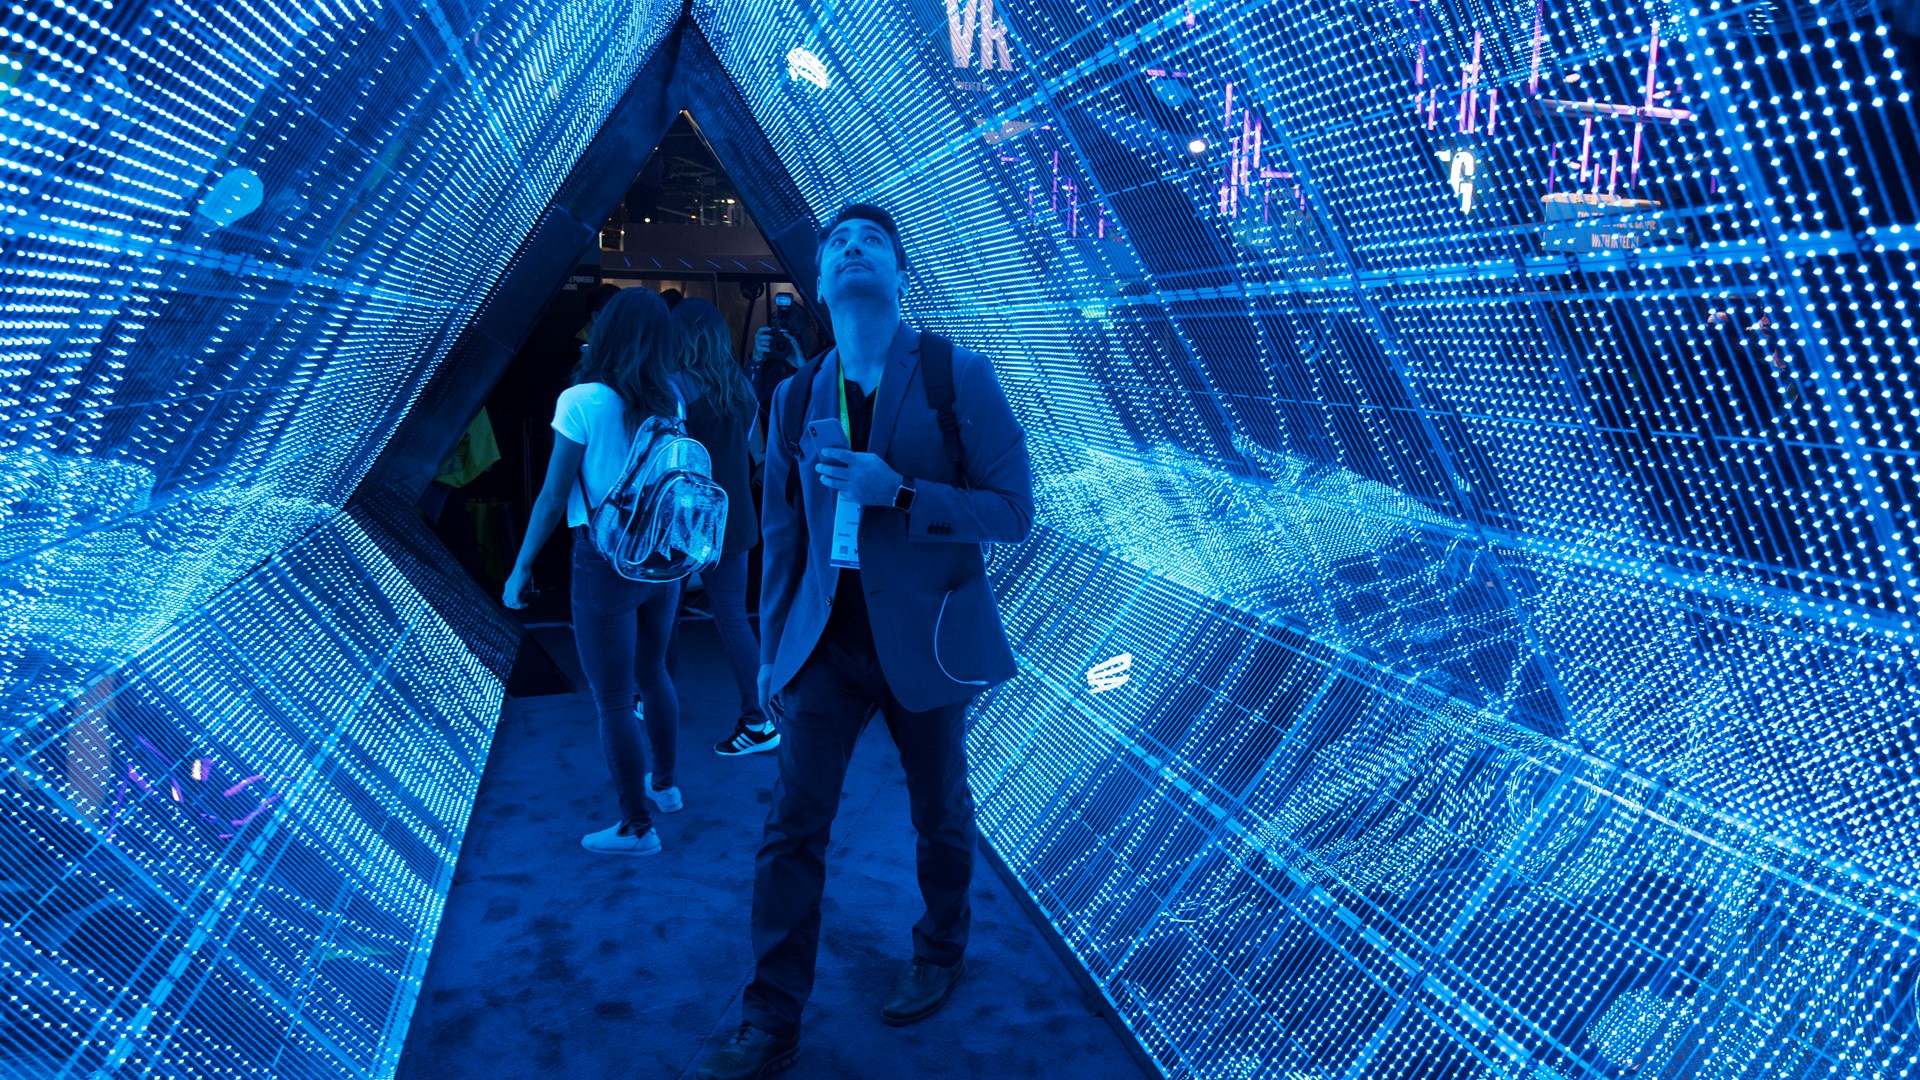 Todd Cox checks out a 5G tunnel from Intel during the second day of CES